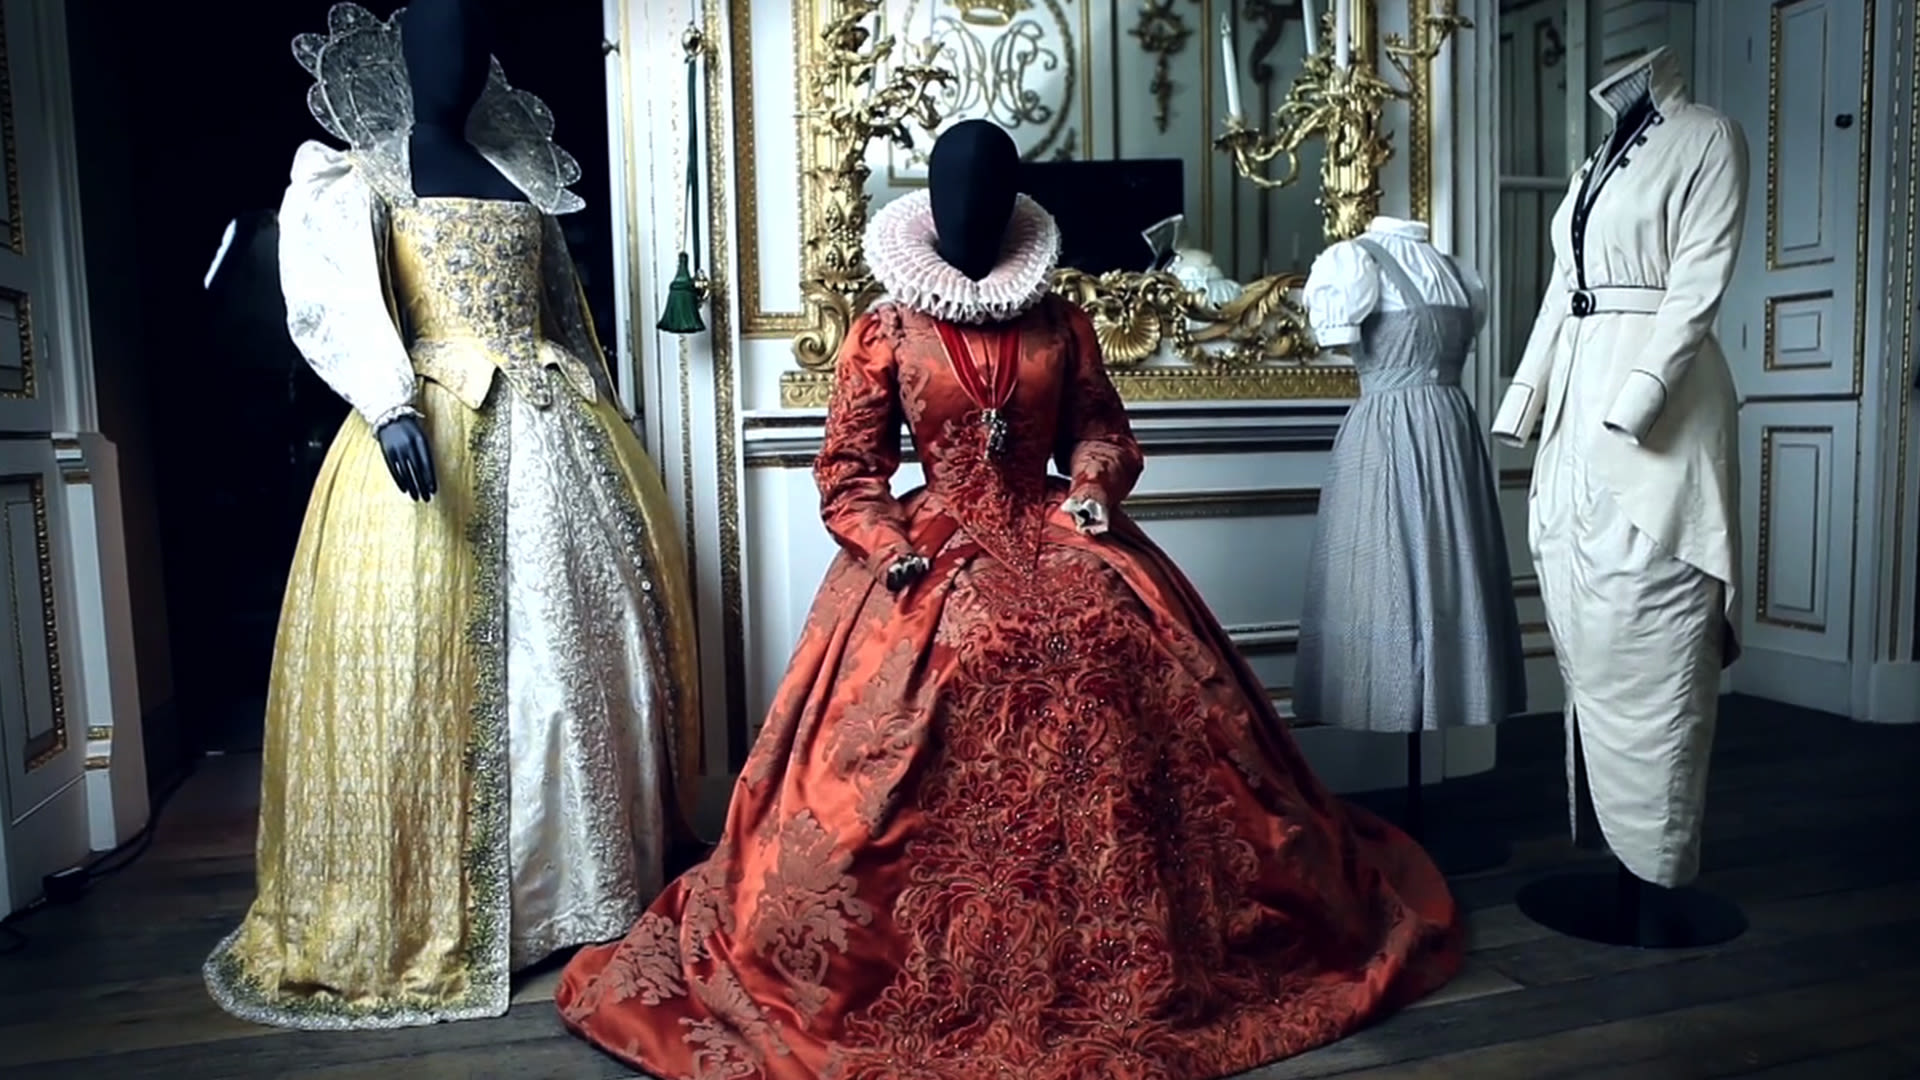 Fashion Collection at the Victoria and Albert Museum 